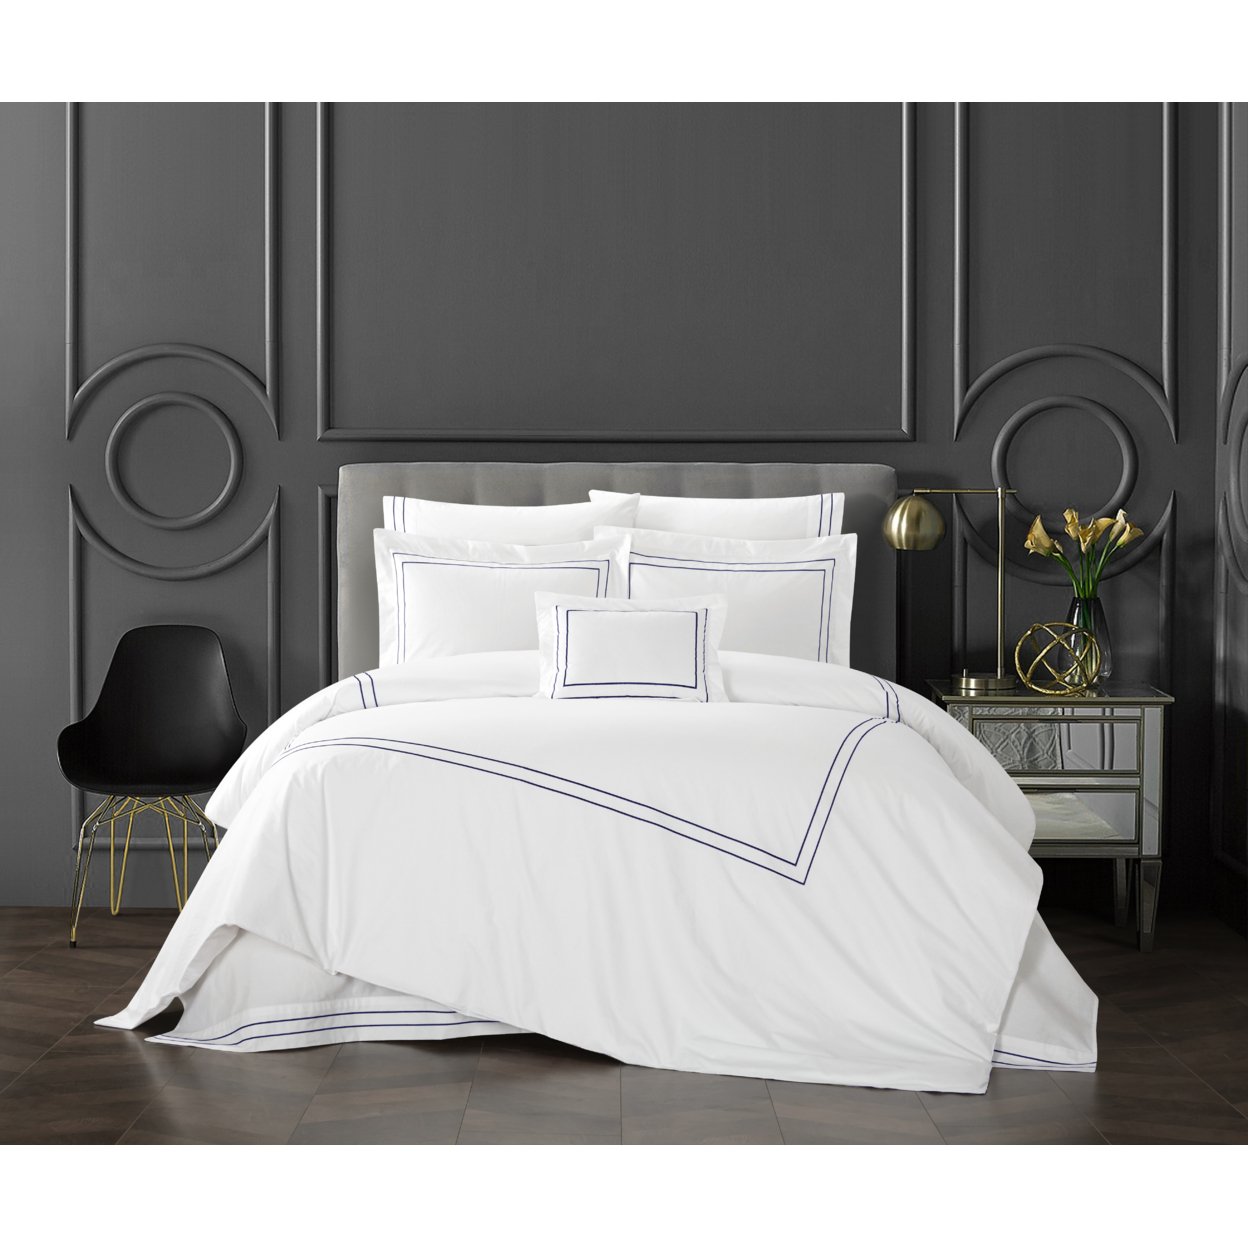 Ilani 4 Piece Cotton Comforter Set Solid White With Dual Stripe Embroidered Border Hotel Collection Bedding - navy, queen - queen navy blue